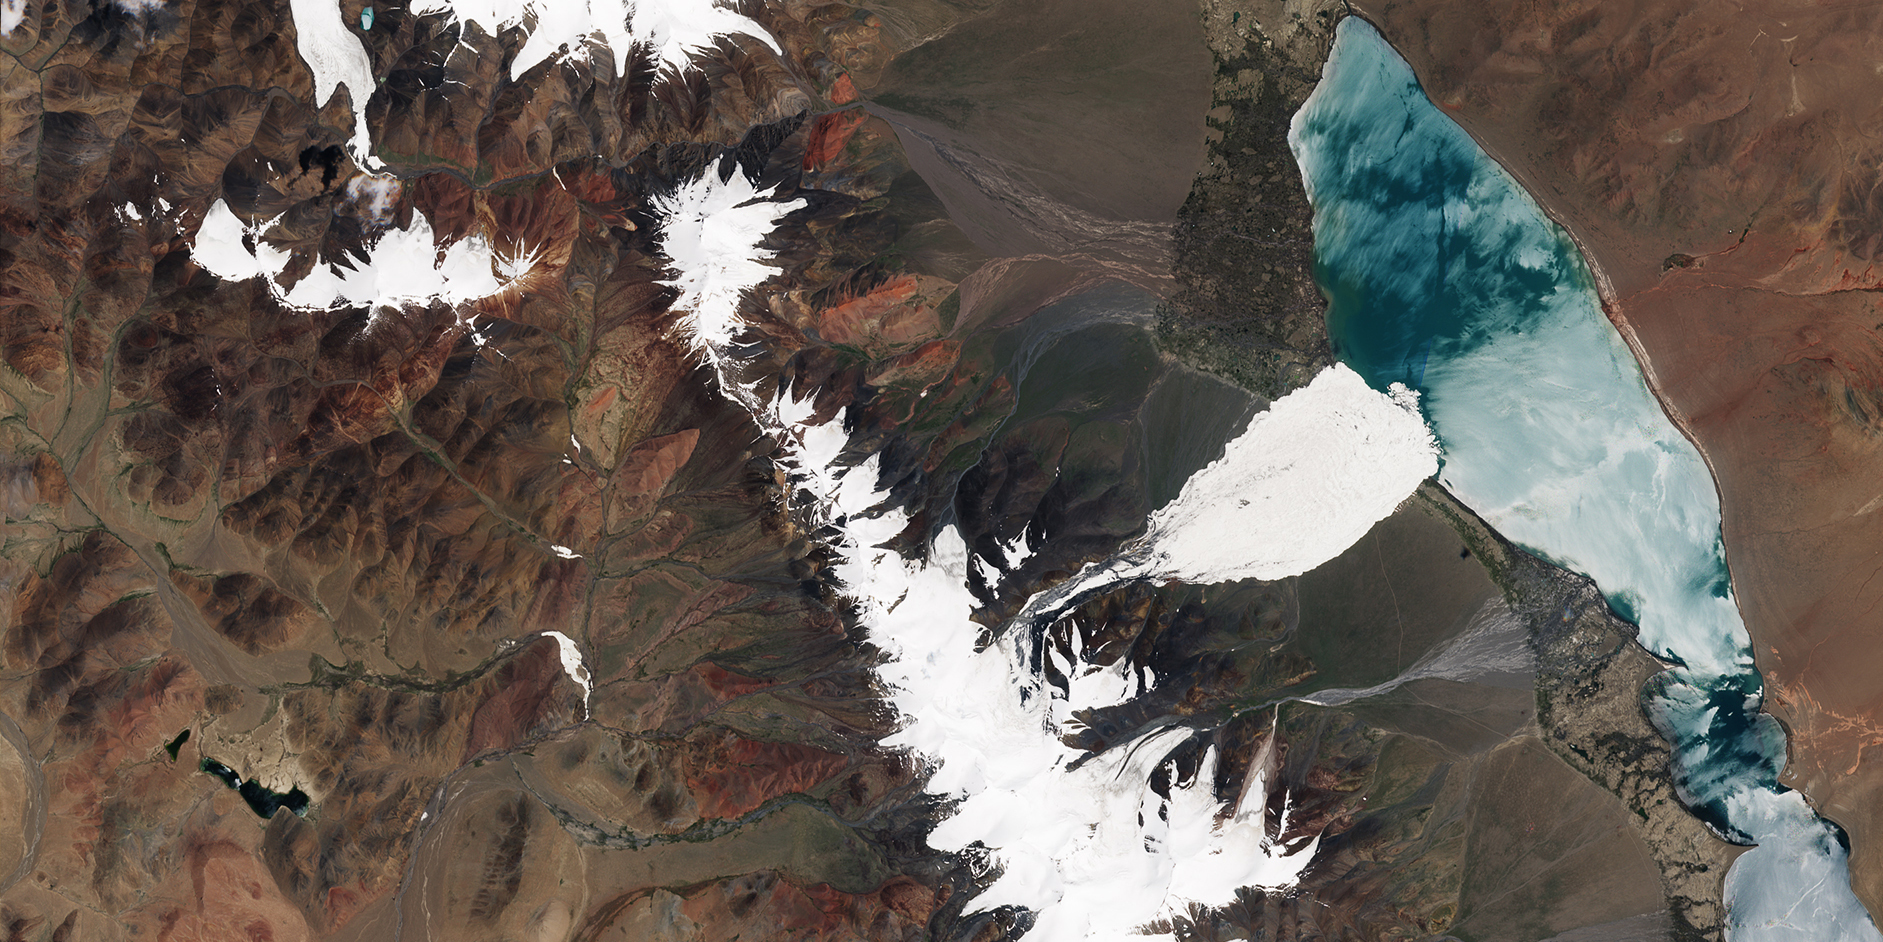 NASA Satellite Images Show Massive Ice Avalanche in Tibet